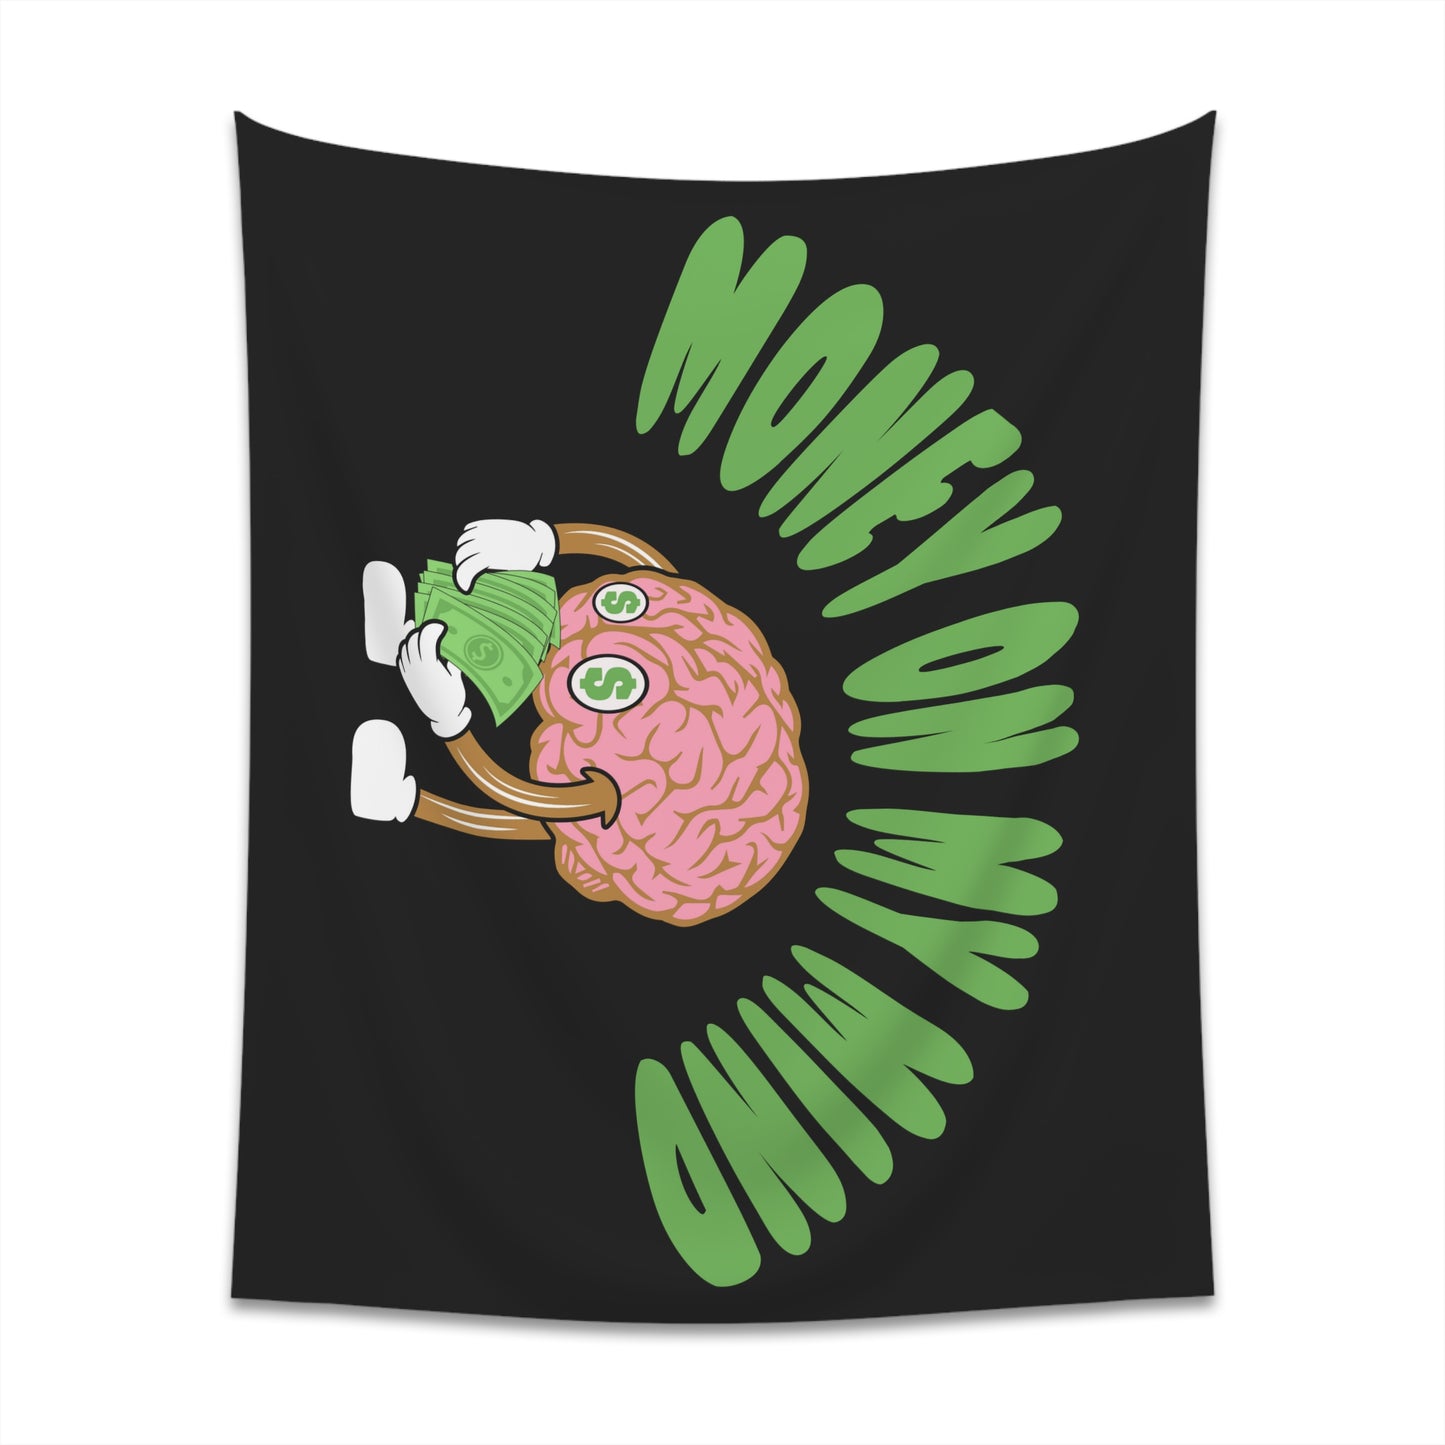 Money on my mind Wall Tapestry